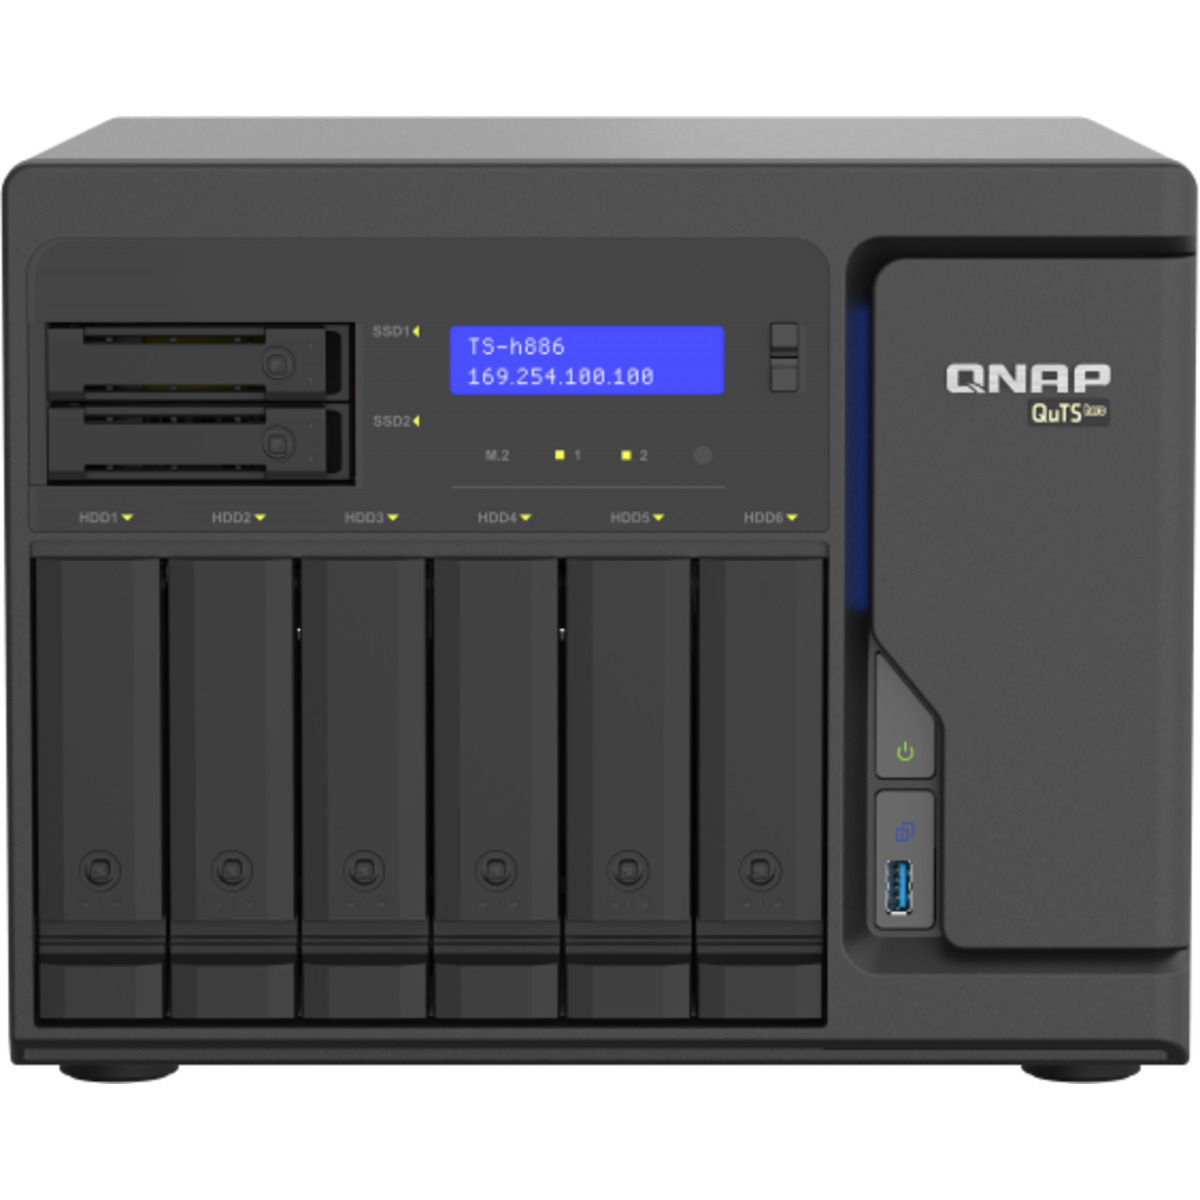 buy $3371 QNAP TS-h886 QuTS hero NAS 36tb Desktop NAS - Network Attached Storage Device 6x6000gb Seagate IronWolf Pro ST6000NT001 3.5 7200rpm SATA 6Gb/s HDD NAS Class Drives Installed - Burn-In Tested - nas headquarters buy network attached storage server device das new raid-5 free shipping simply usa TS-h886 QuTS hero NAS